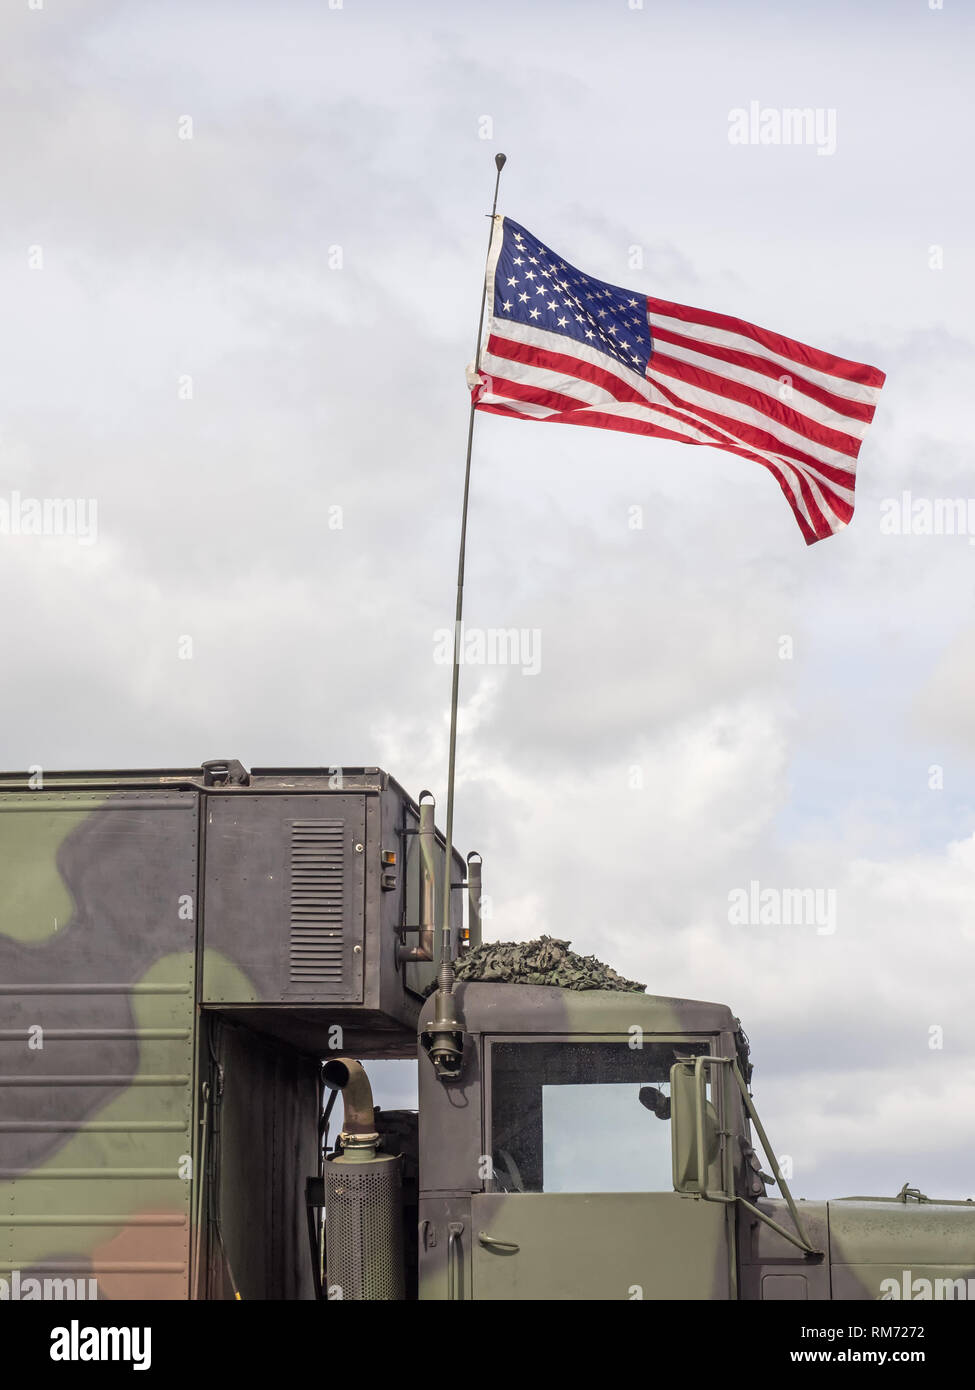 US flag waves at a military vehicle Stock Photo